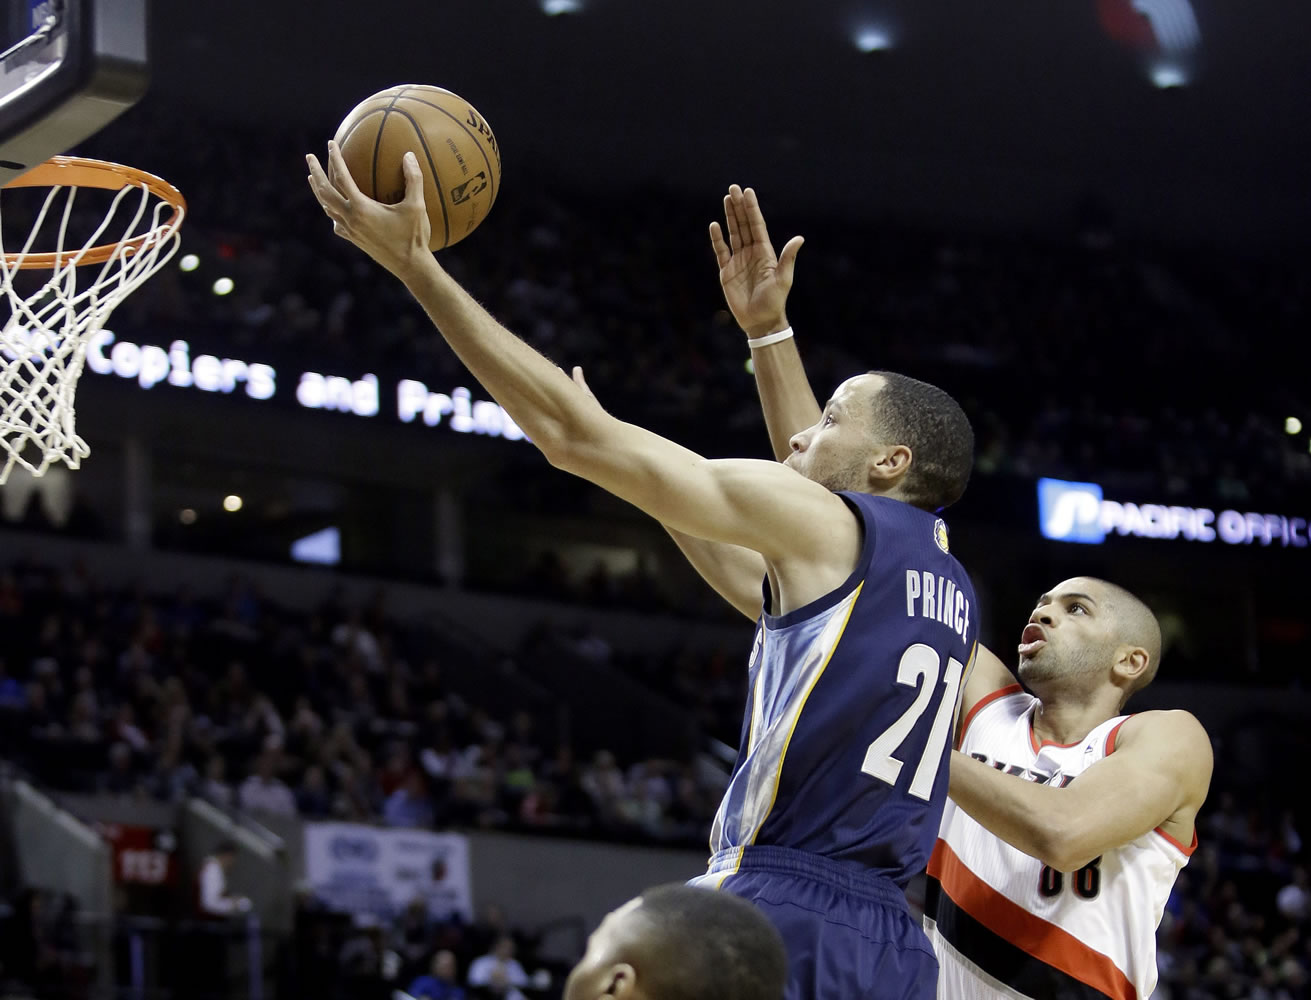 Memphis Grizzlies forward Tayshaun Prince, left, drives to the hoop past Portland Trail Blazers forward Nicolas Batum during the first half of an NBA basketball game in Portland on Tuesday.